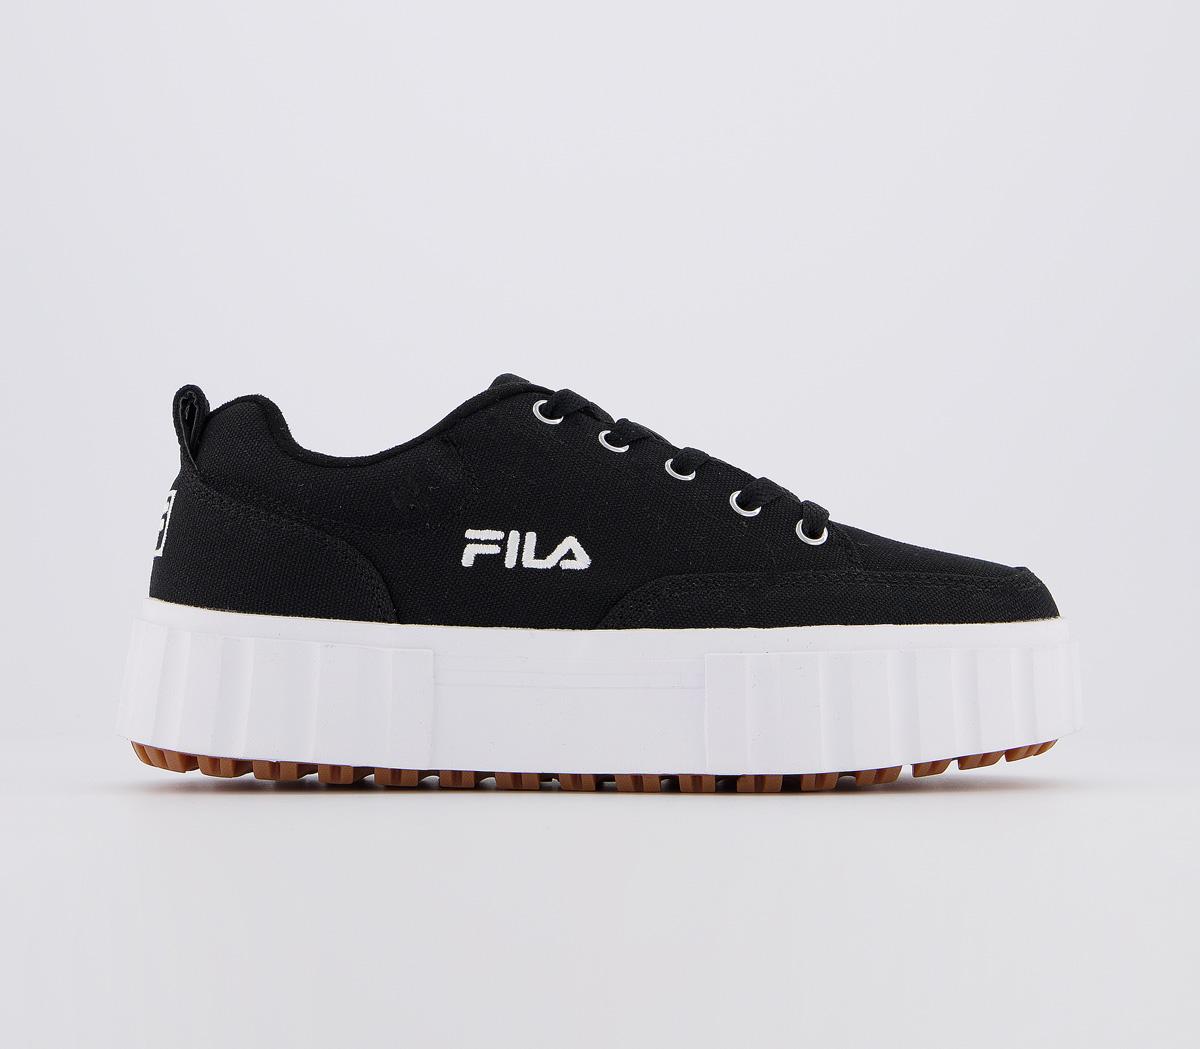 fila black and white shoes